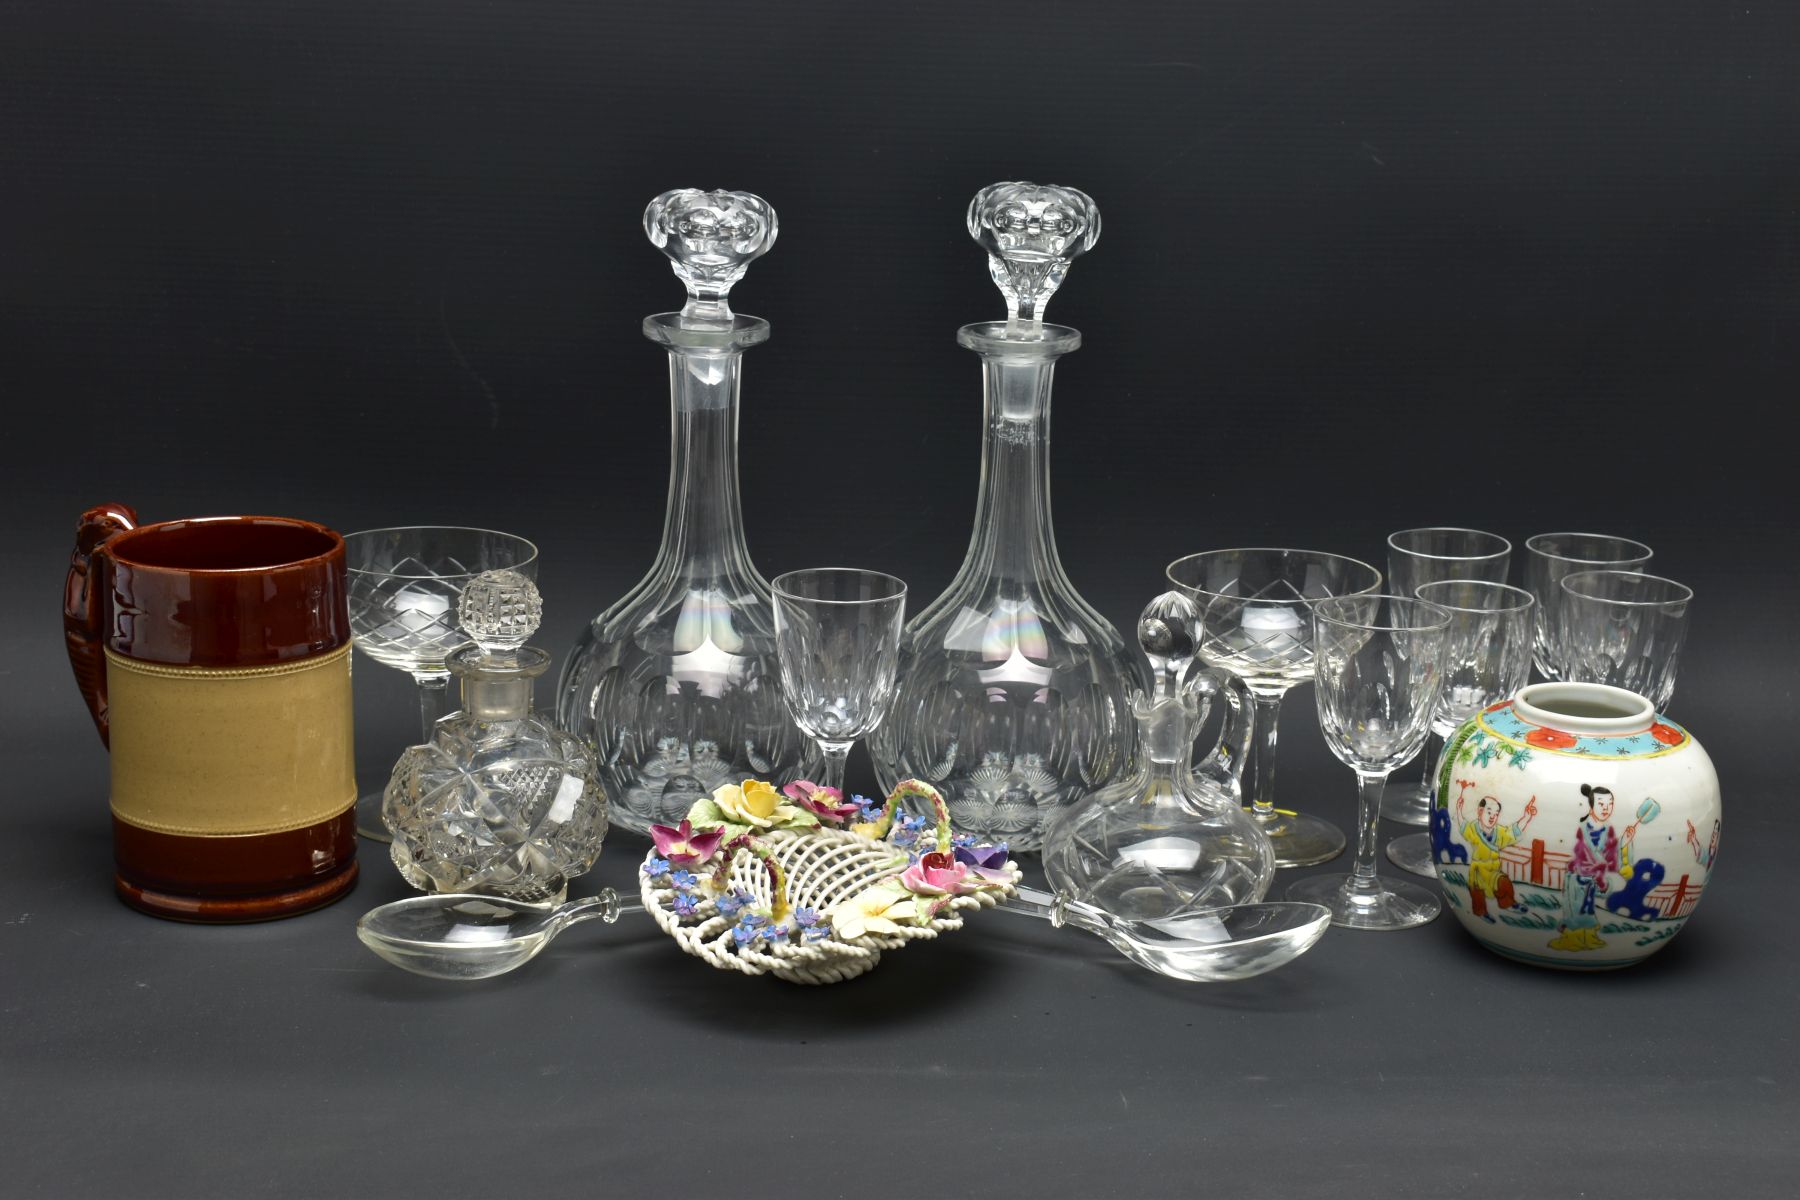 A SMALL QUANTITY OF CERAMICS AND GLASS, comprising a pair of globe and shaft decanters (one